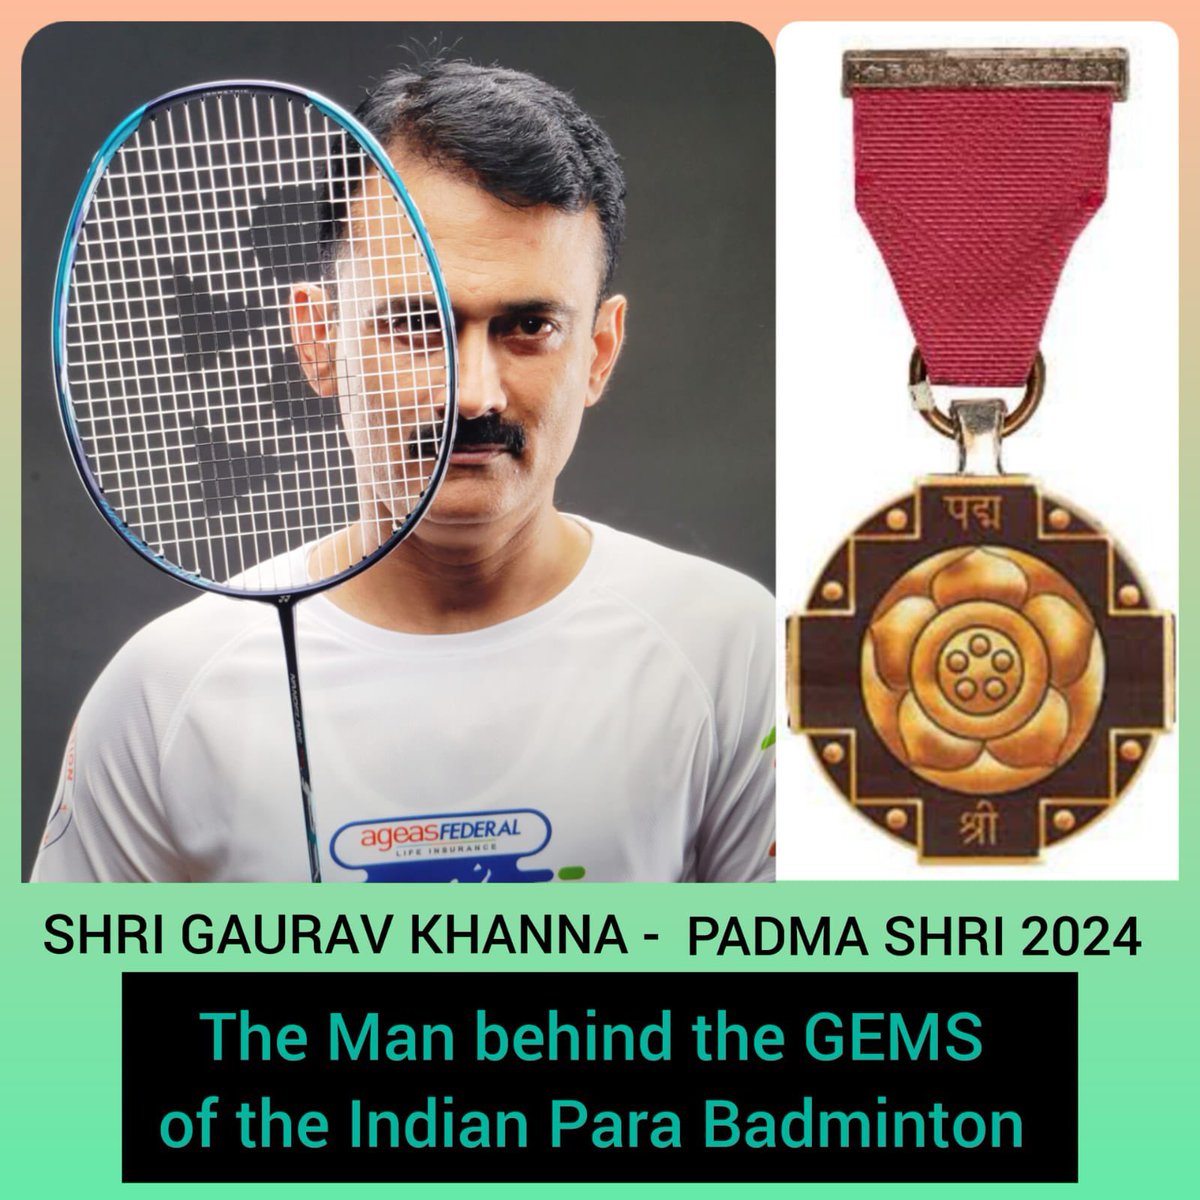 Congratulations to Para-Badminton coach @GauravParaCoach for receiving the Padma Shri Award! His commitment to shaping young para-shuttlers into medal winners in Lucknow is inspiring. Many Para-shuttlers, like our Meraki stars Palak and Mandeep, credit their success to Gaurav Sir